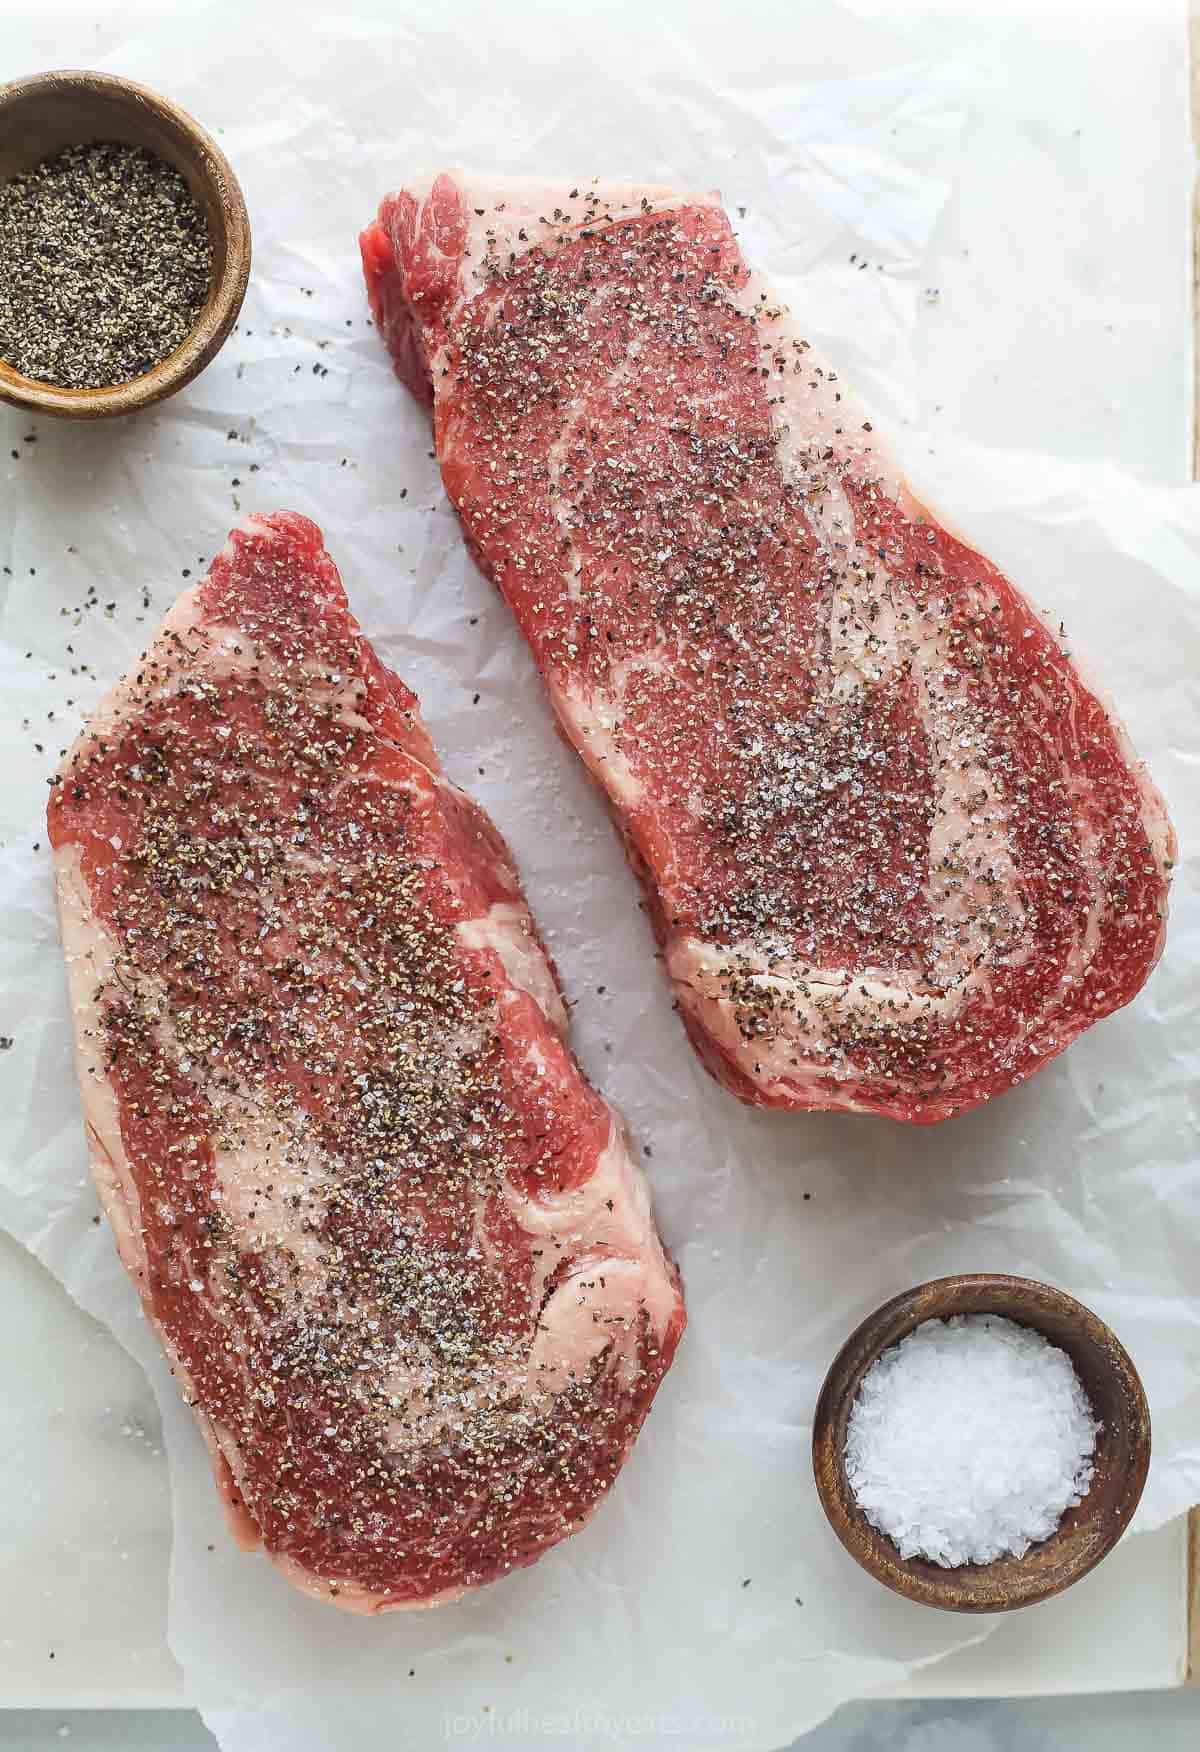 Seasoning the steaks with salt and pepper on all sides.